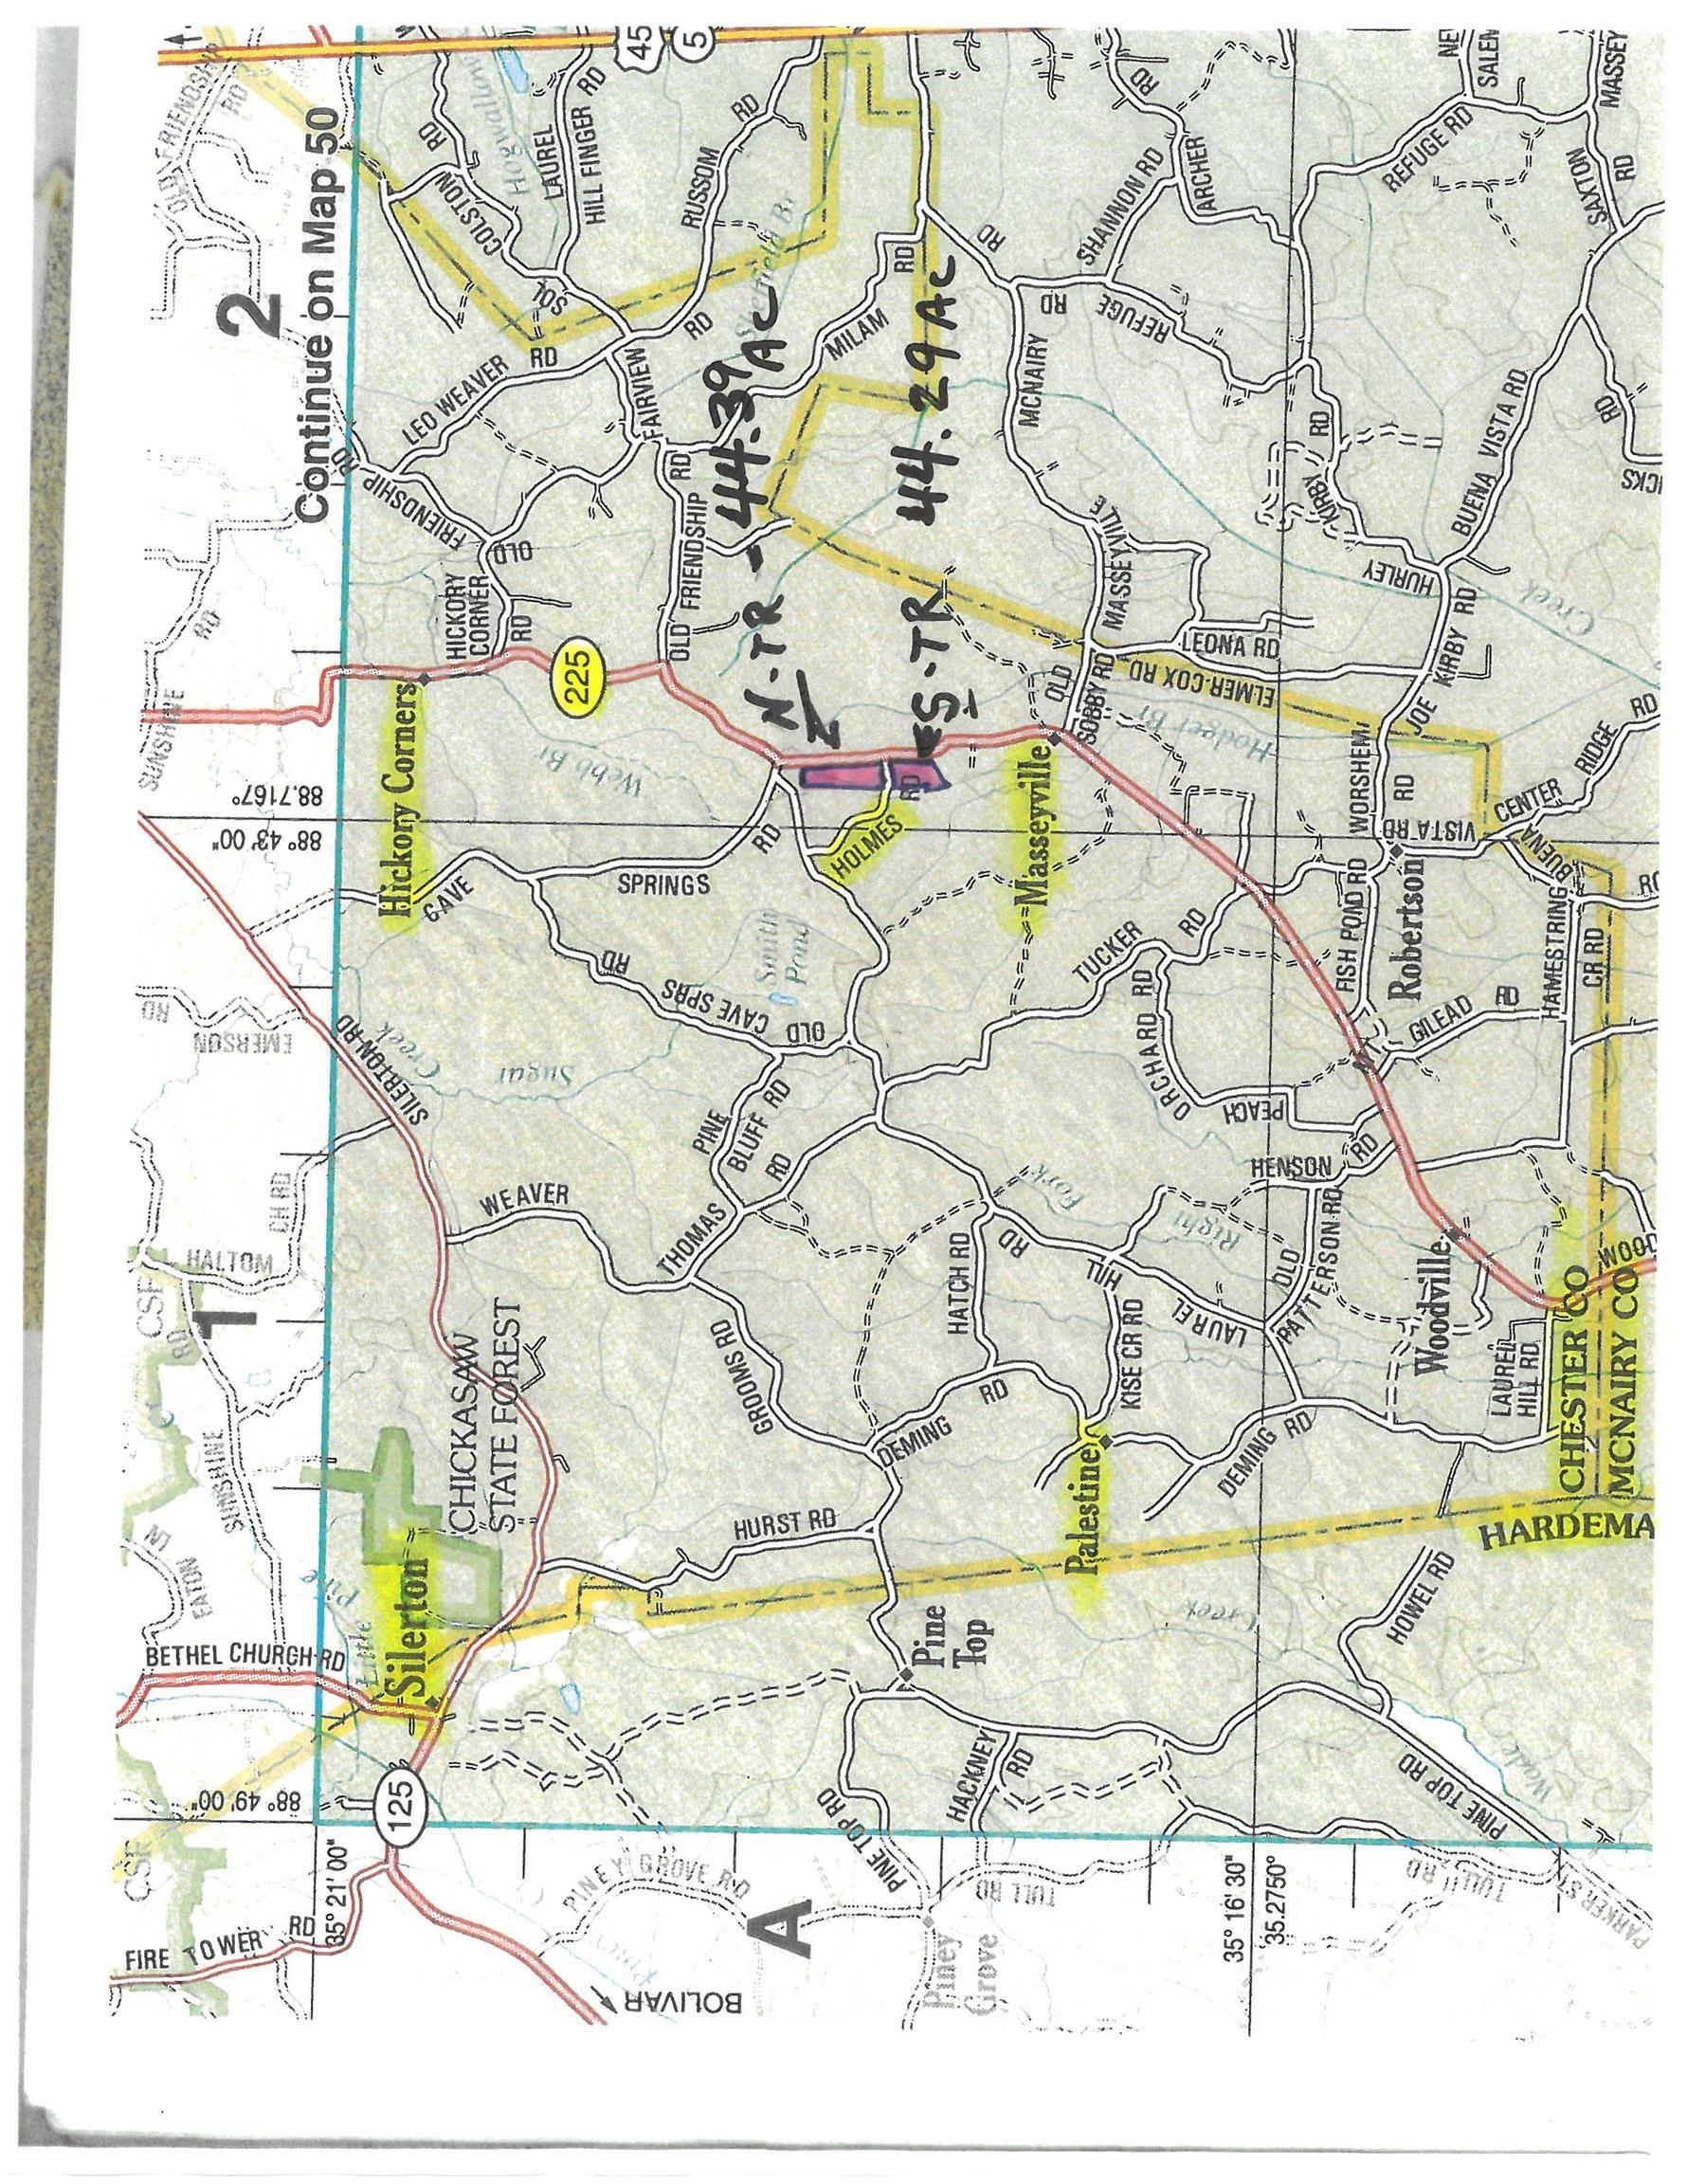 16. Holmes Rd And Hwy 225 (North Tract)